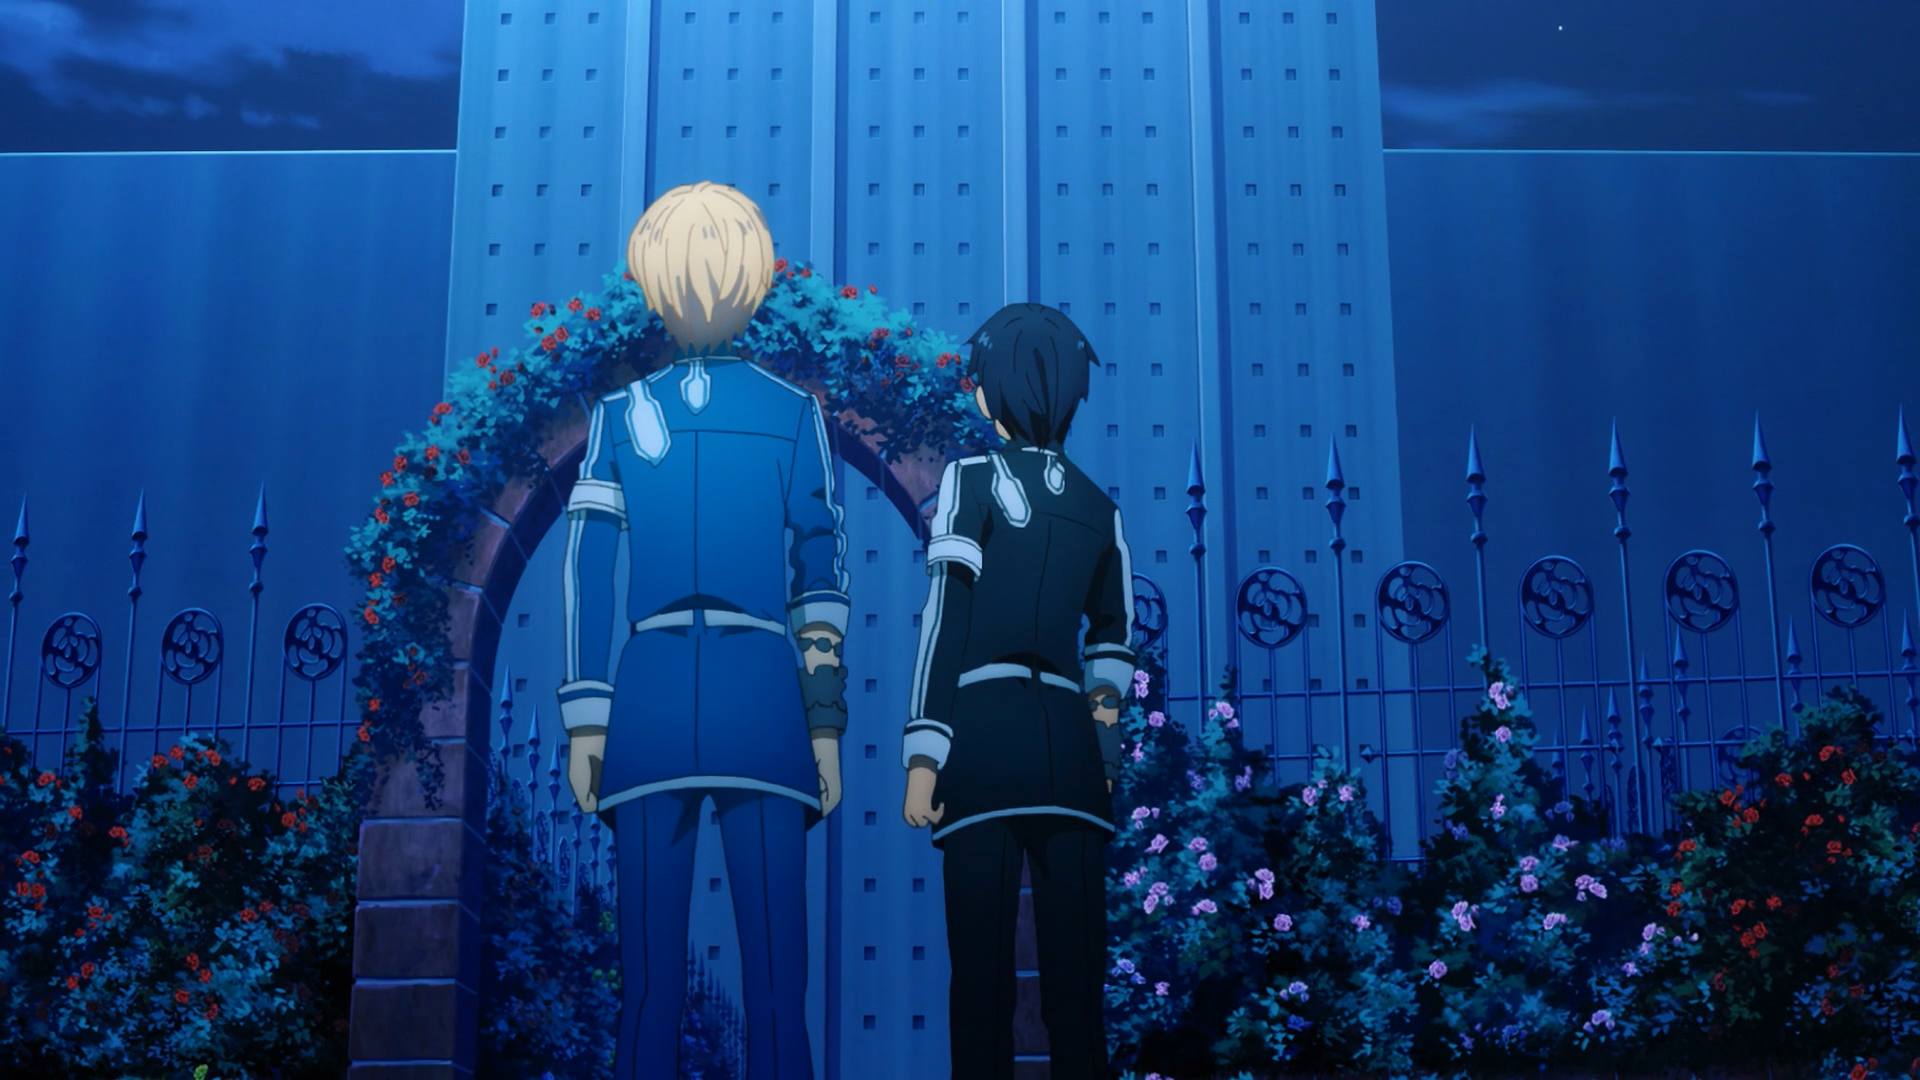 Read Cote: Trapped Inside The World Of Sword Art Online (Sao